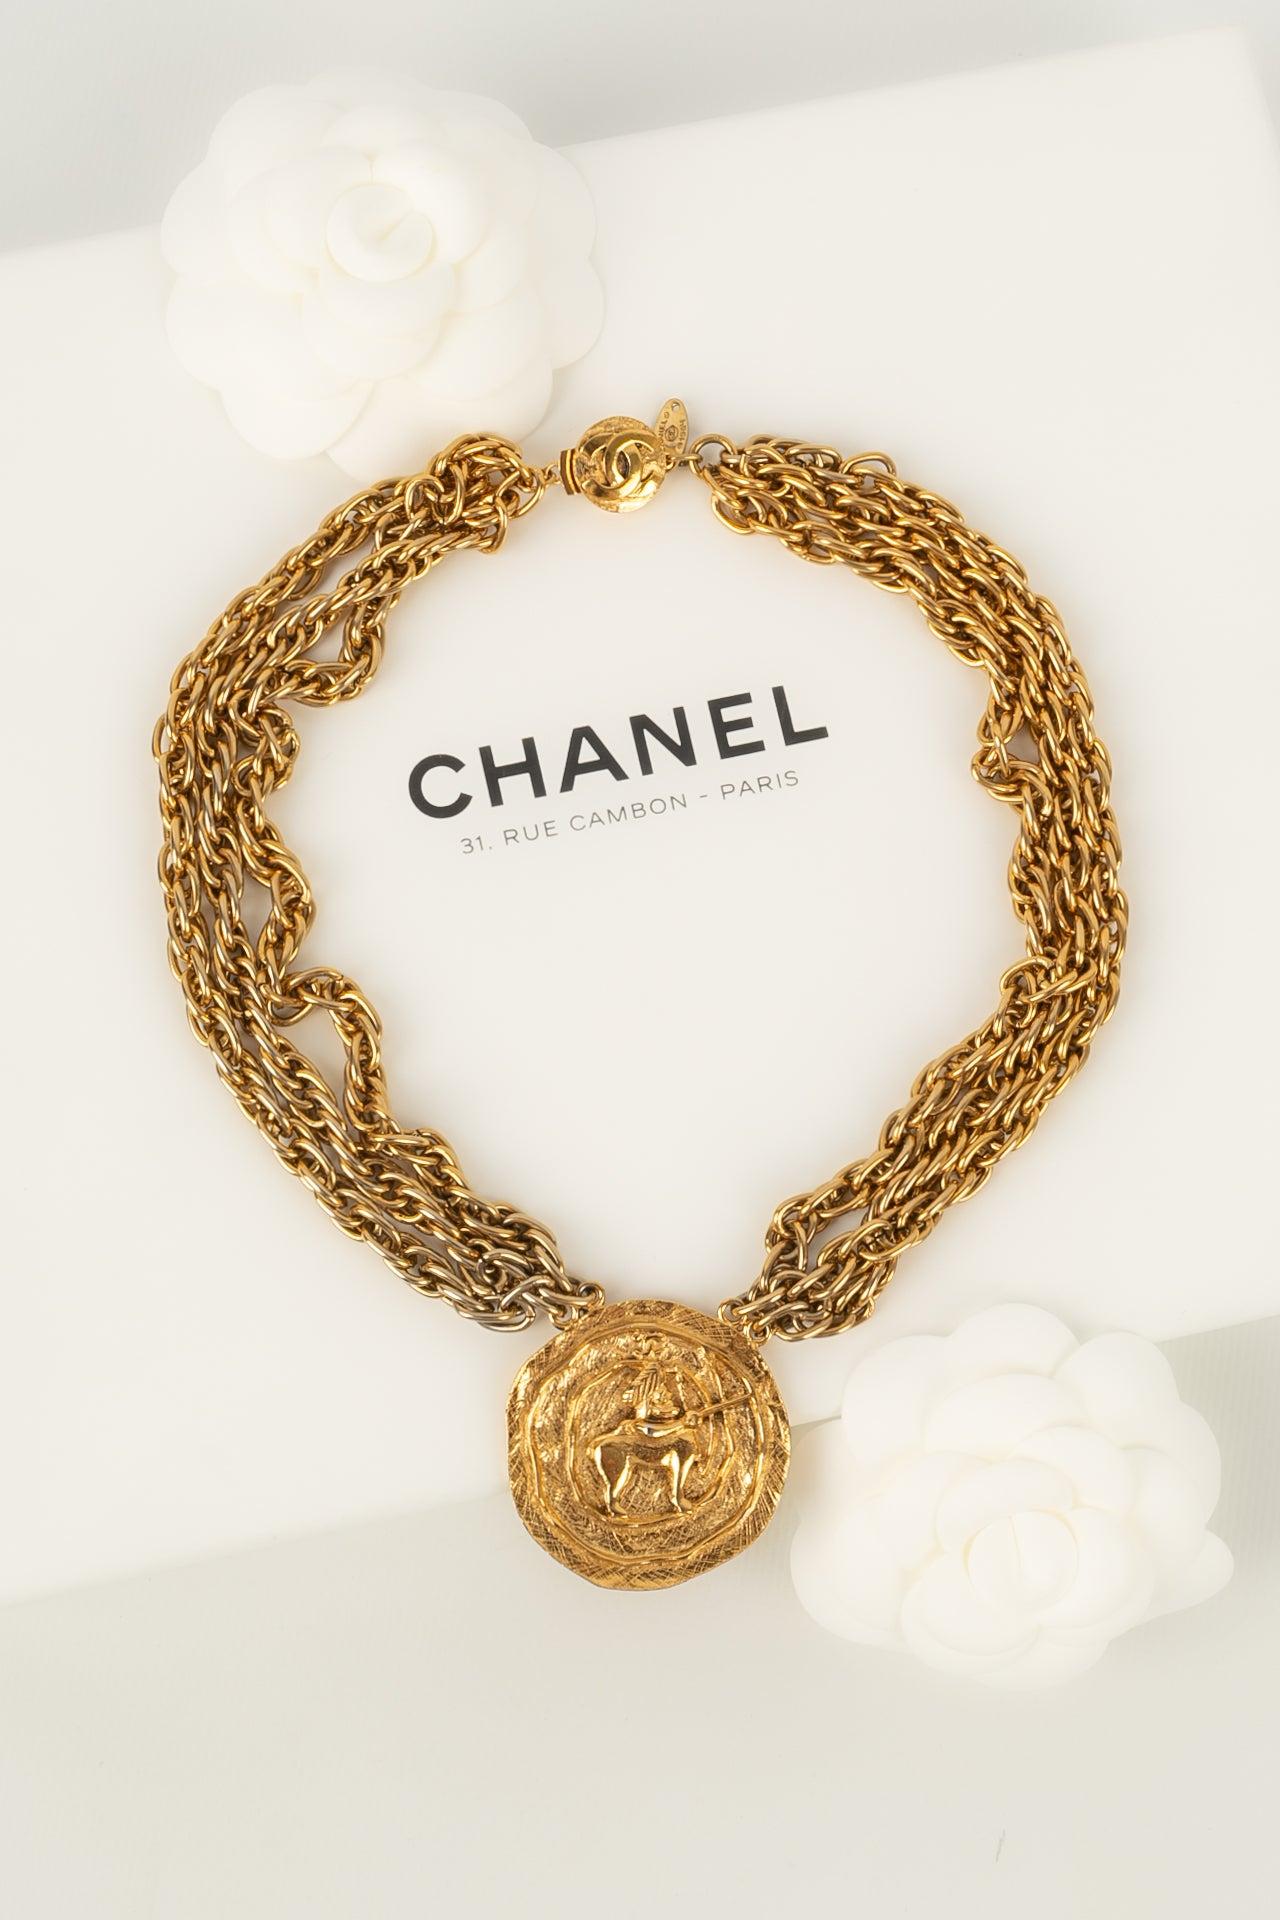 Chanel - (Made in France) Multi-chain necklace in gold metal and engraved medallion. Collection 1984.

Additional information:
Dimensions: Length: 45 cm
Condition: Very good condition
Seller Ref number: CB123